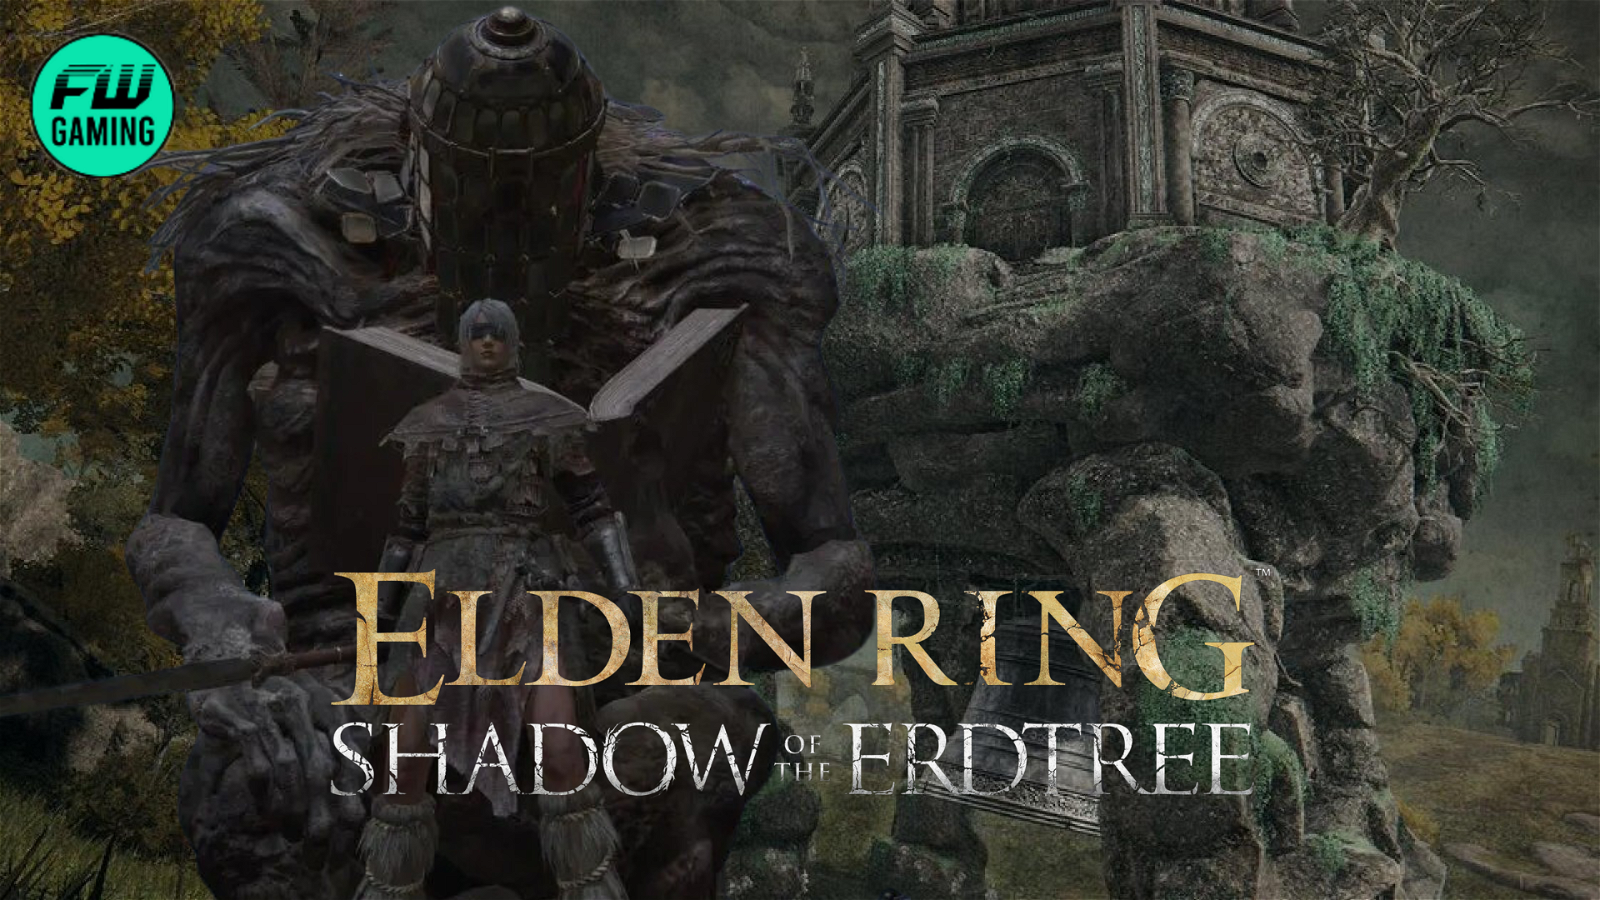 3 Elden Ring Mysteries That the Upcoming Elden Ring DLC Shadow of the Erdtree Has to Answer